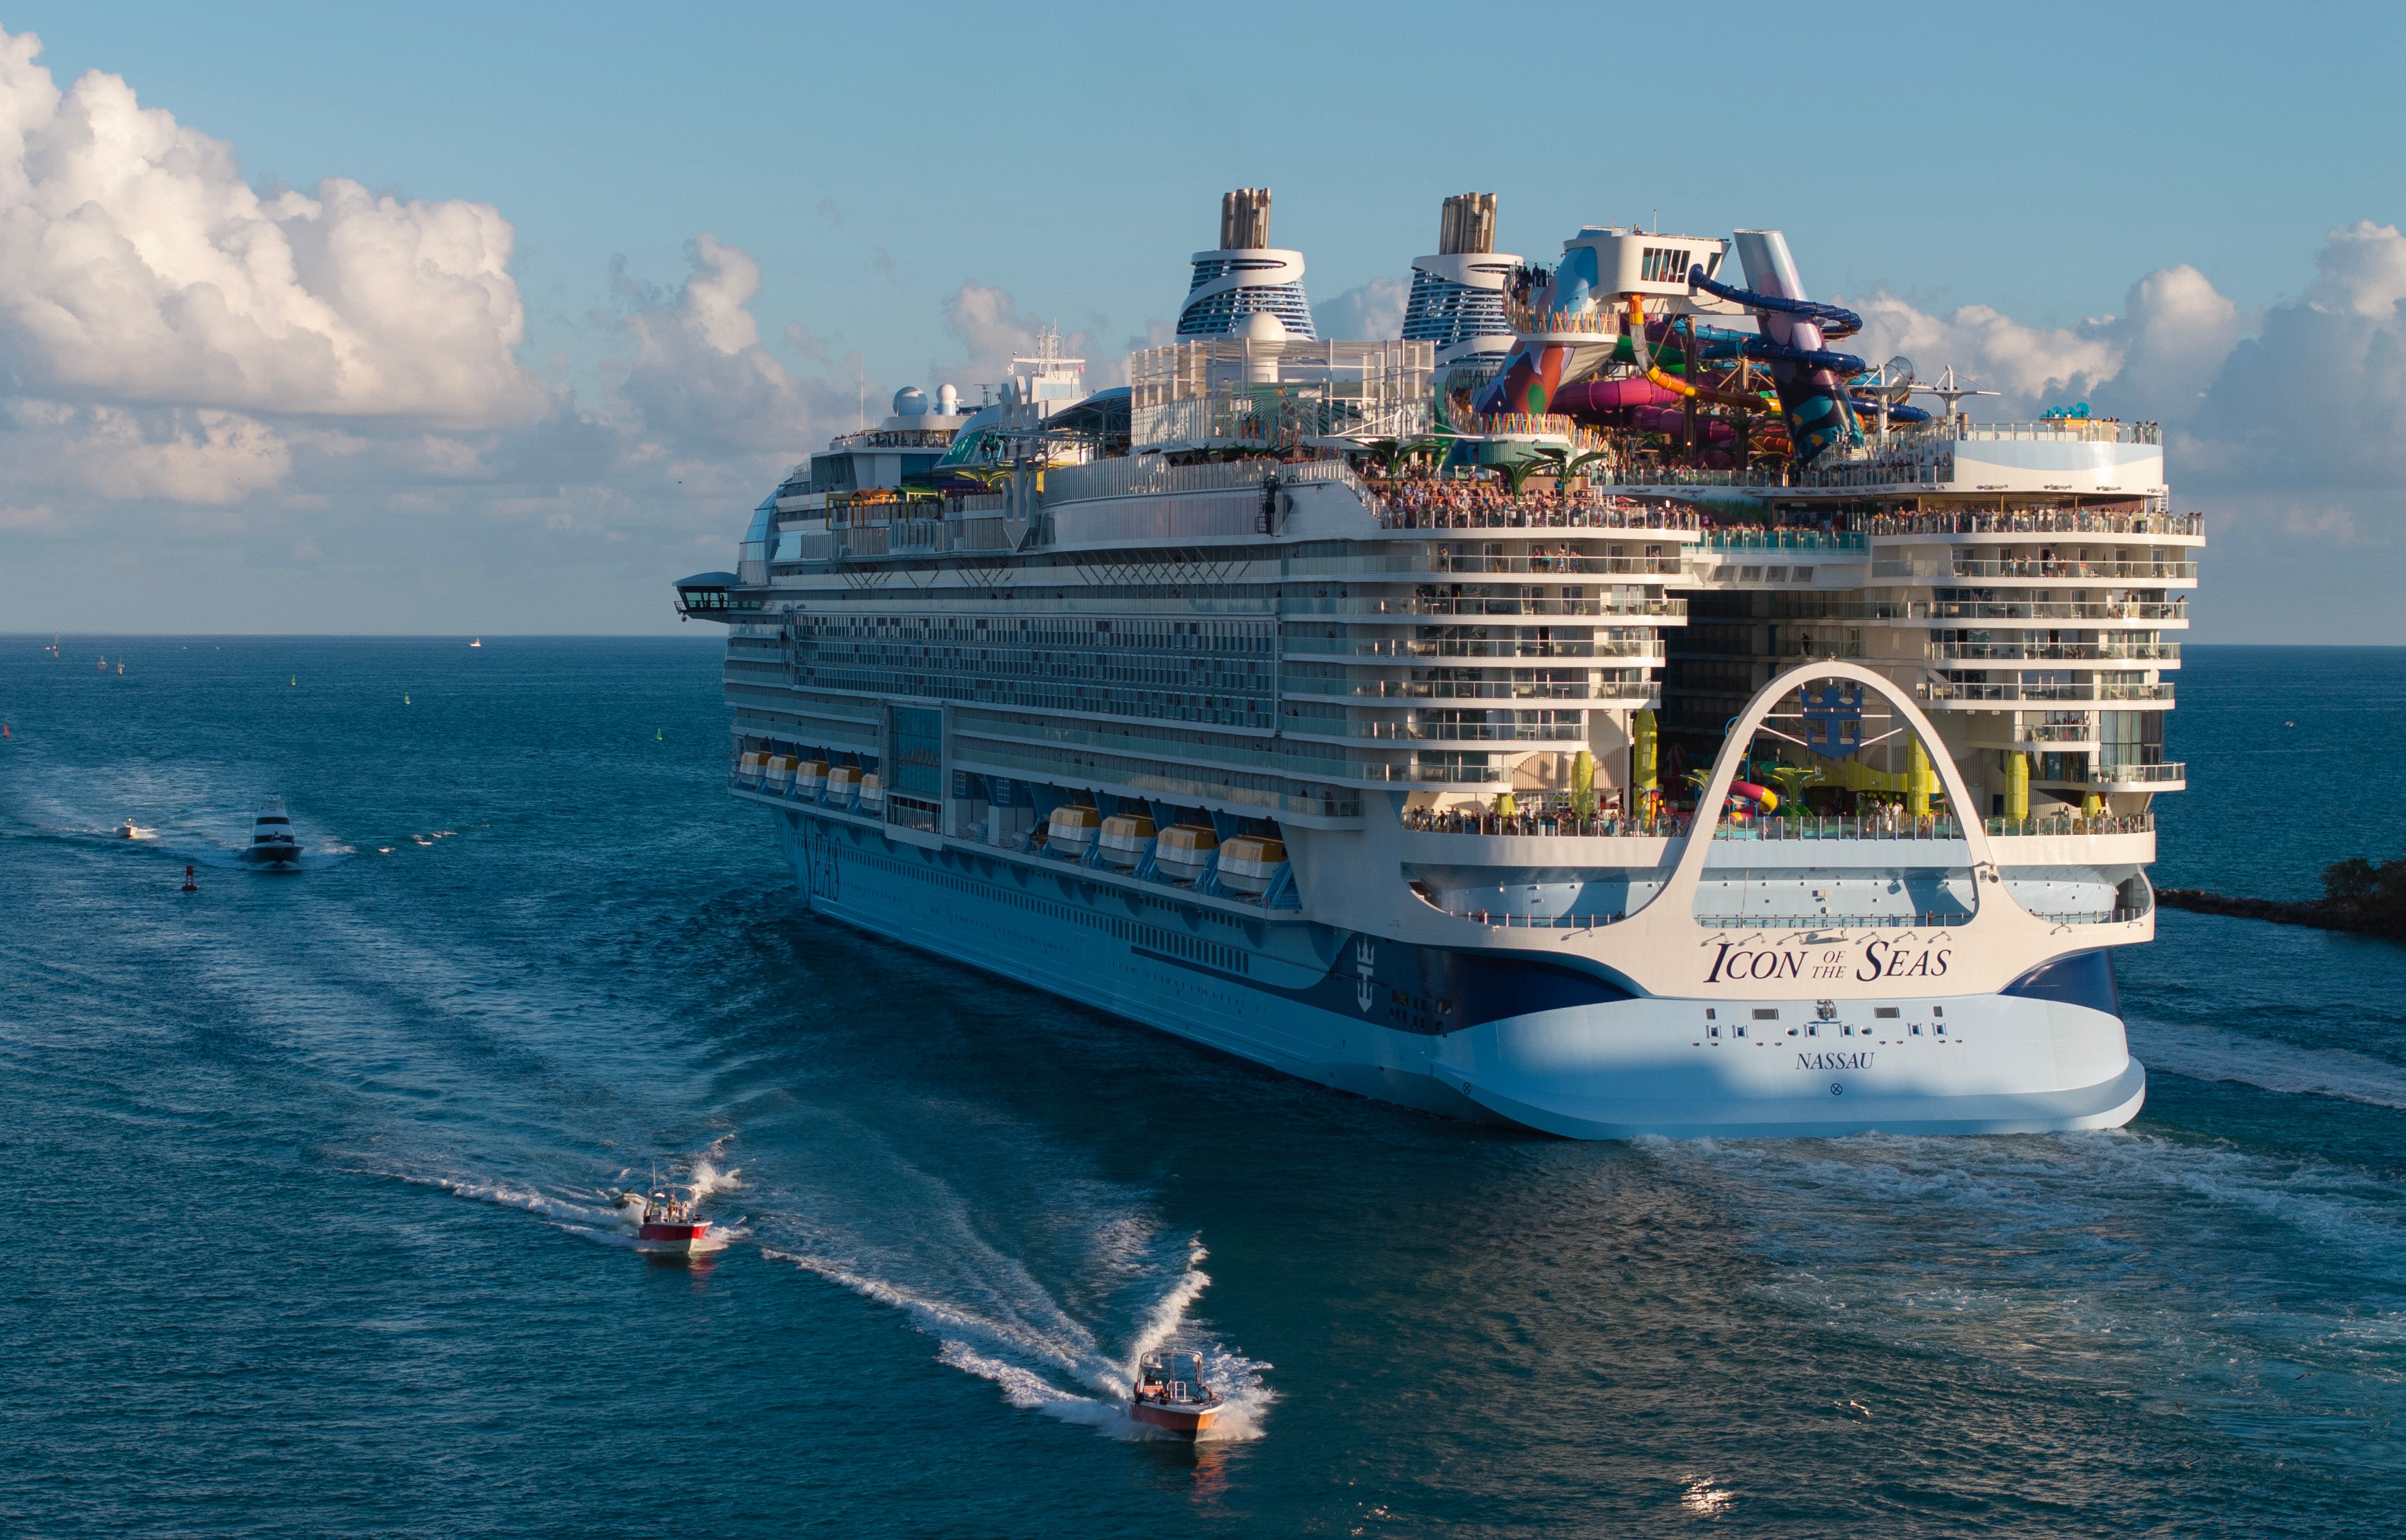 Royal Caribbean’s Icon of the Seas, the world’s largest cruise ship, had to change its itinerary to avoid Hurricane Beryl this week